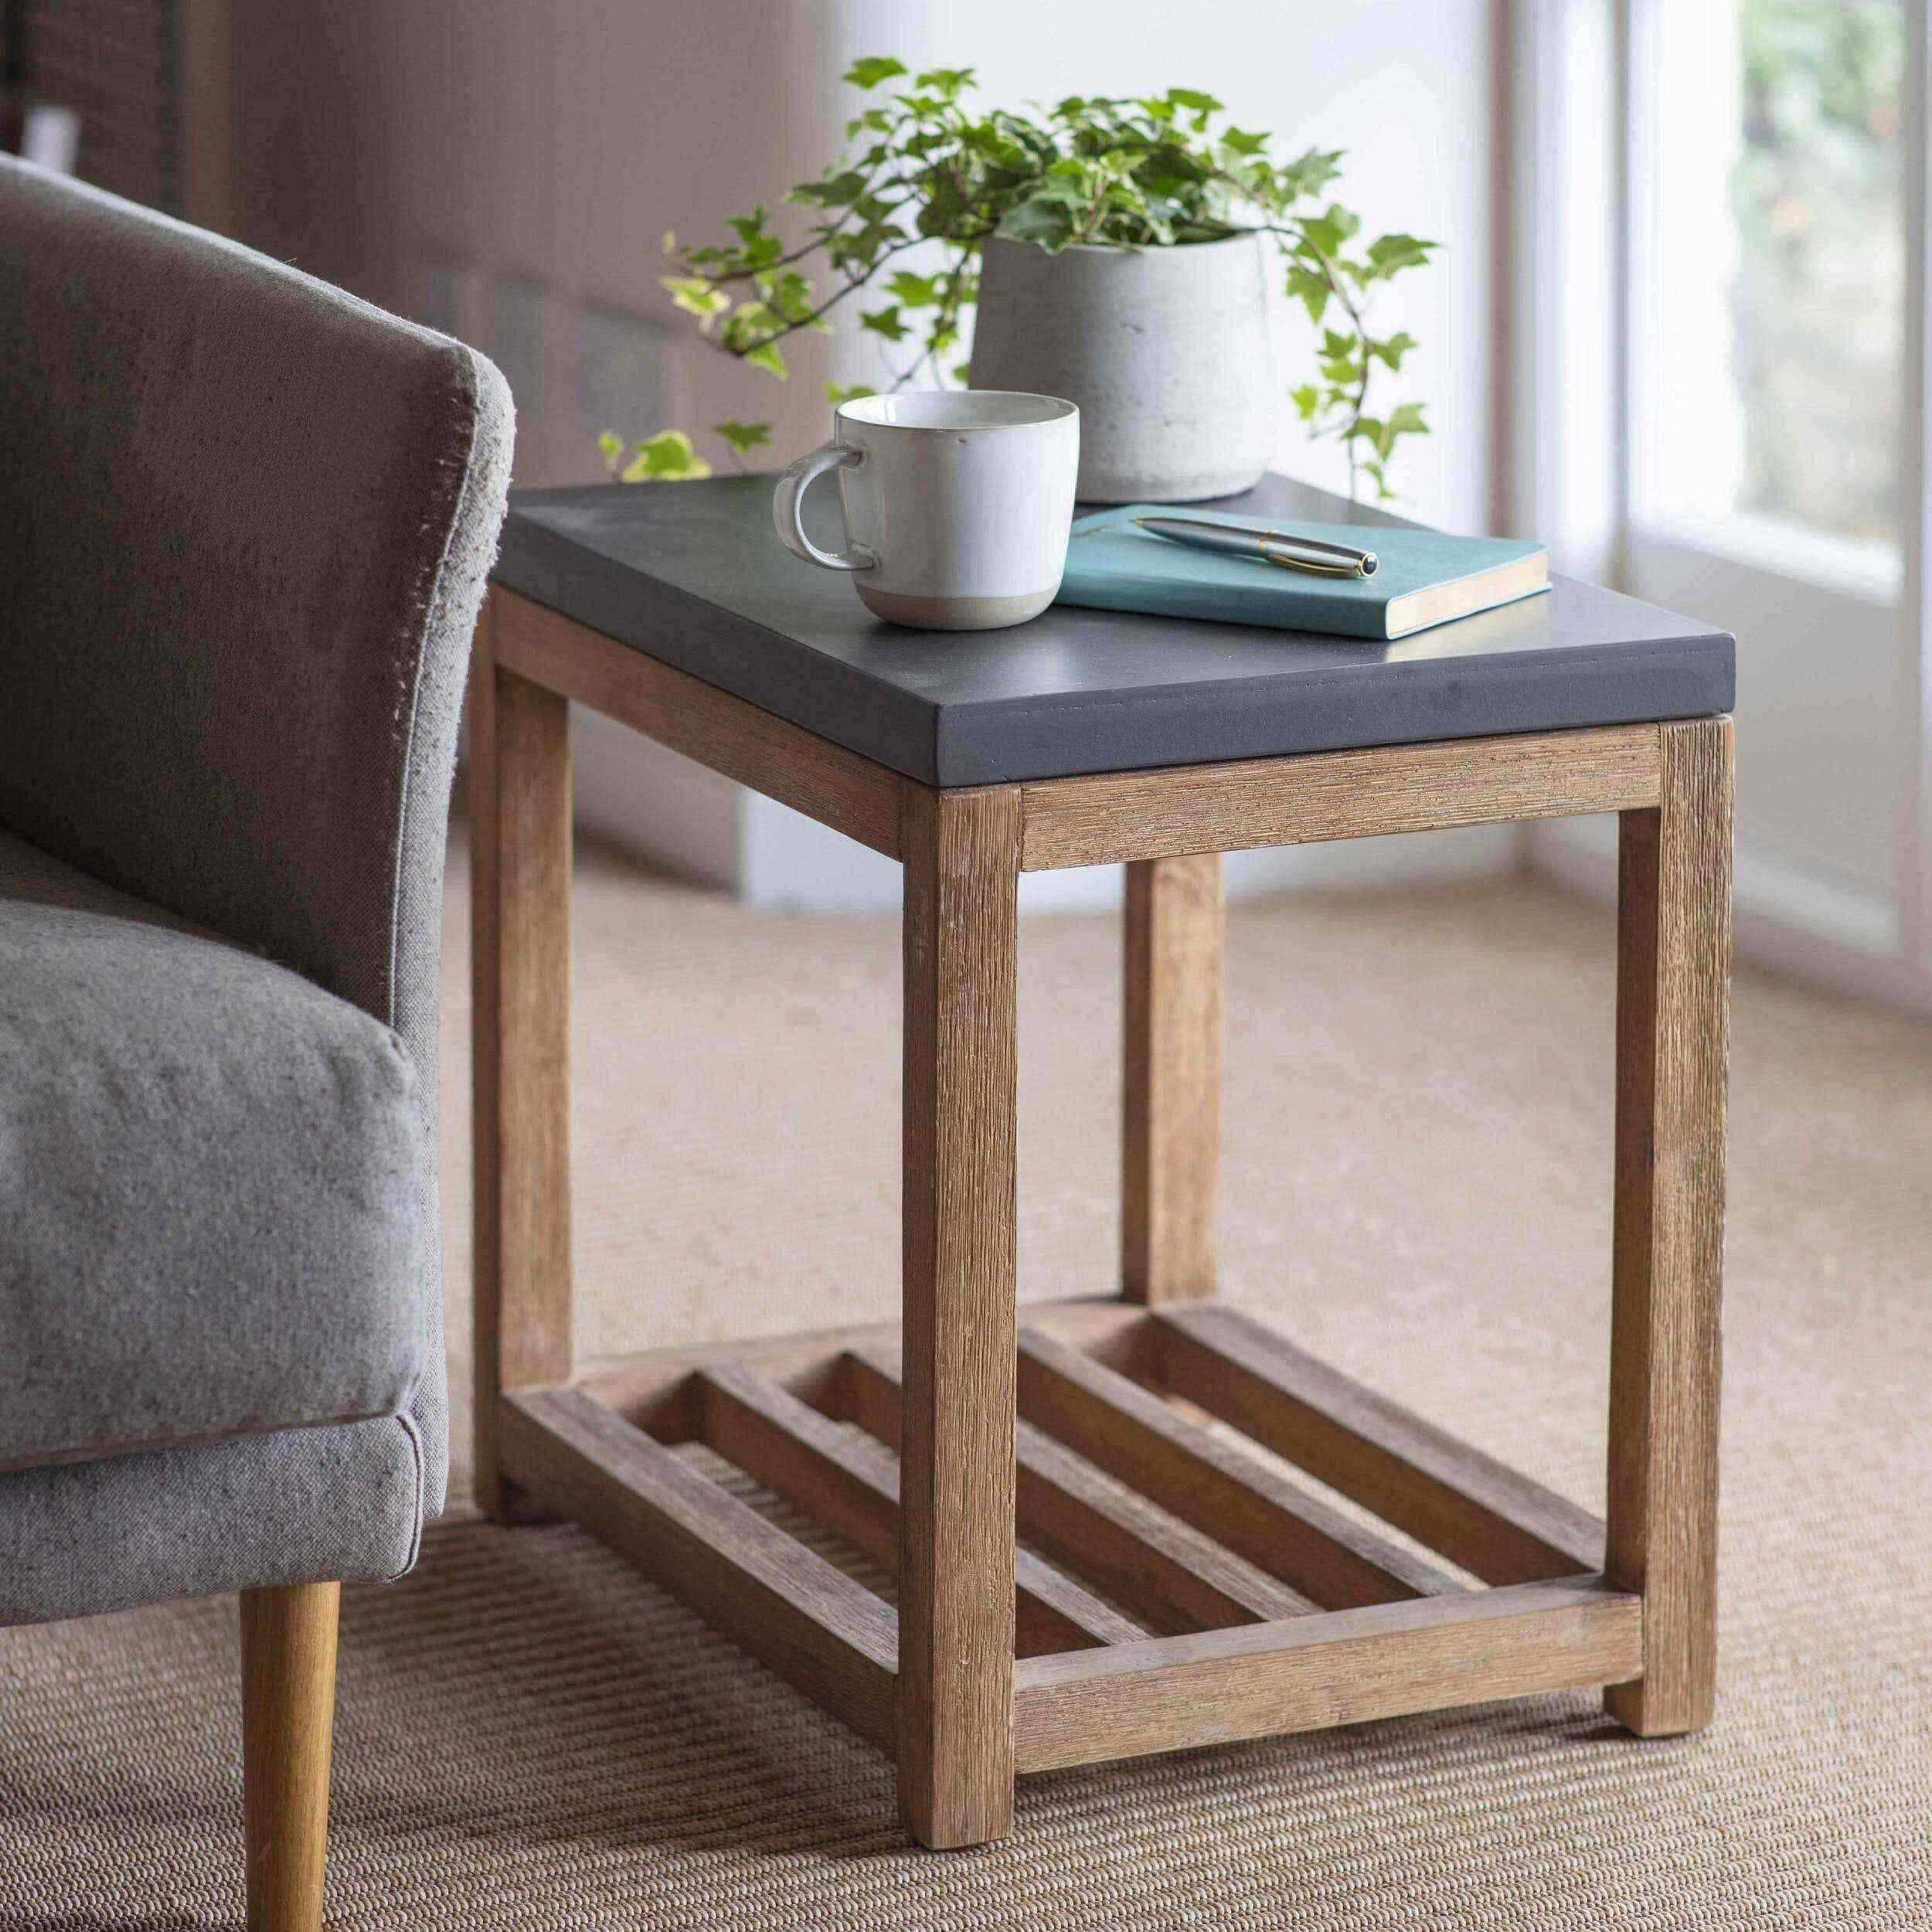 Rustic Wood and Grey Top Side Table with Shelf - The Farthing